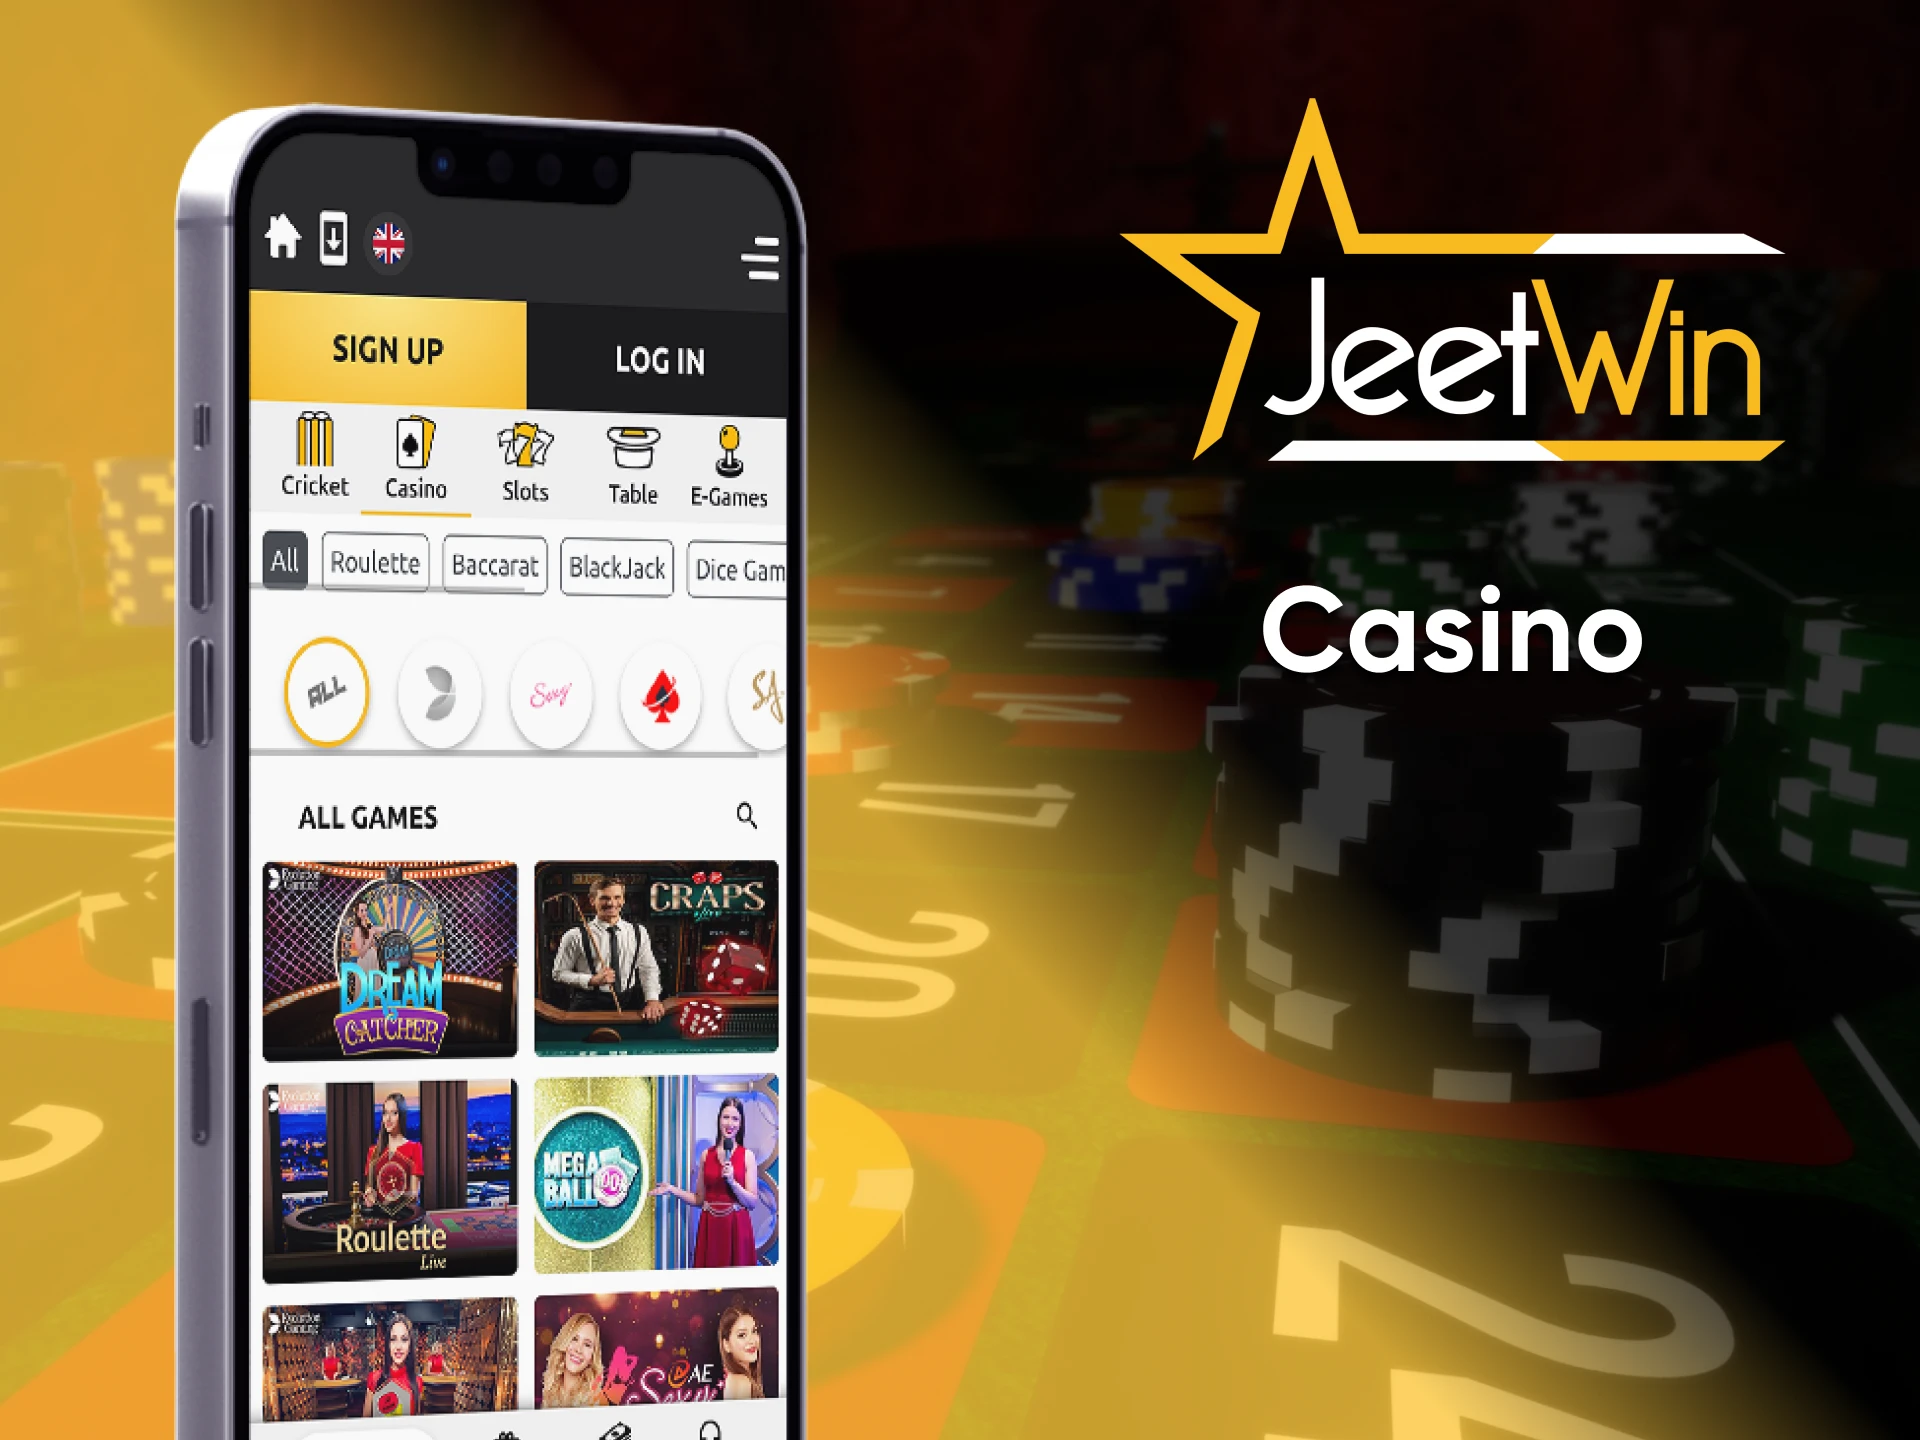 You can play at the casino from Jeetwin through the application.